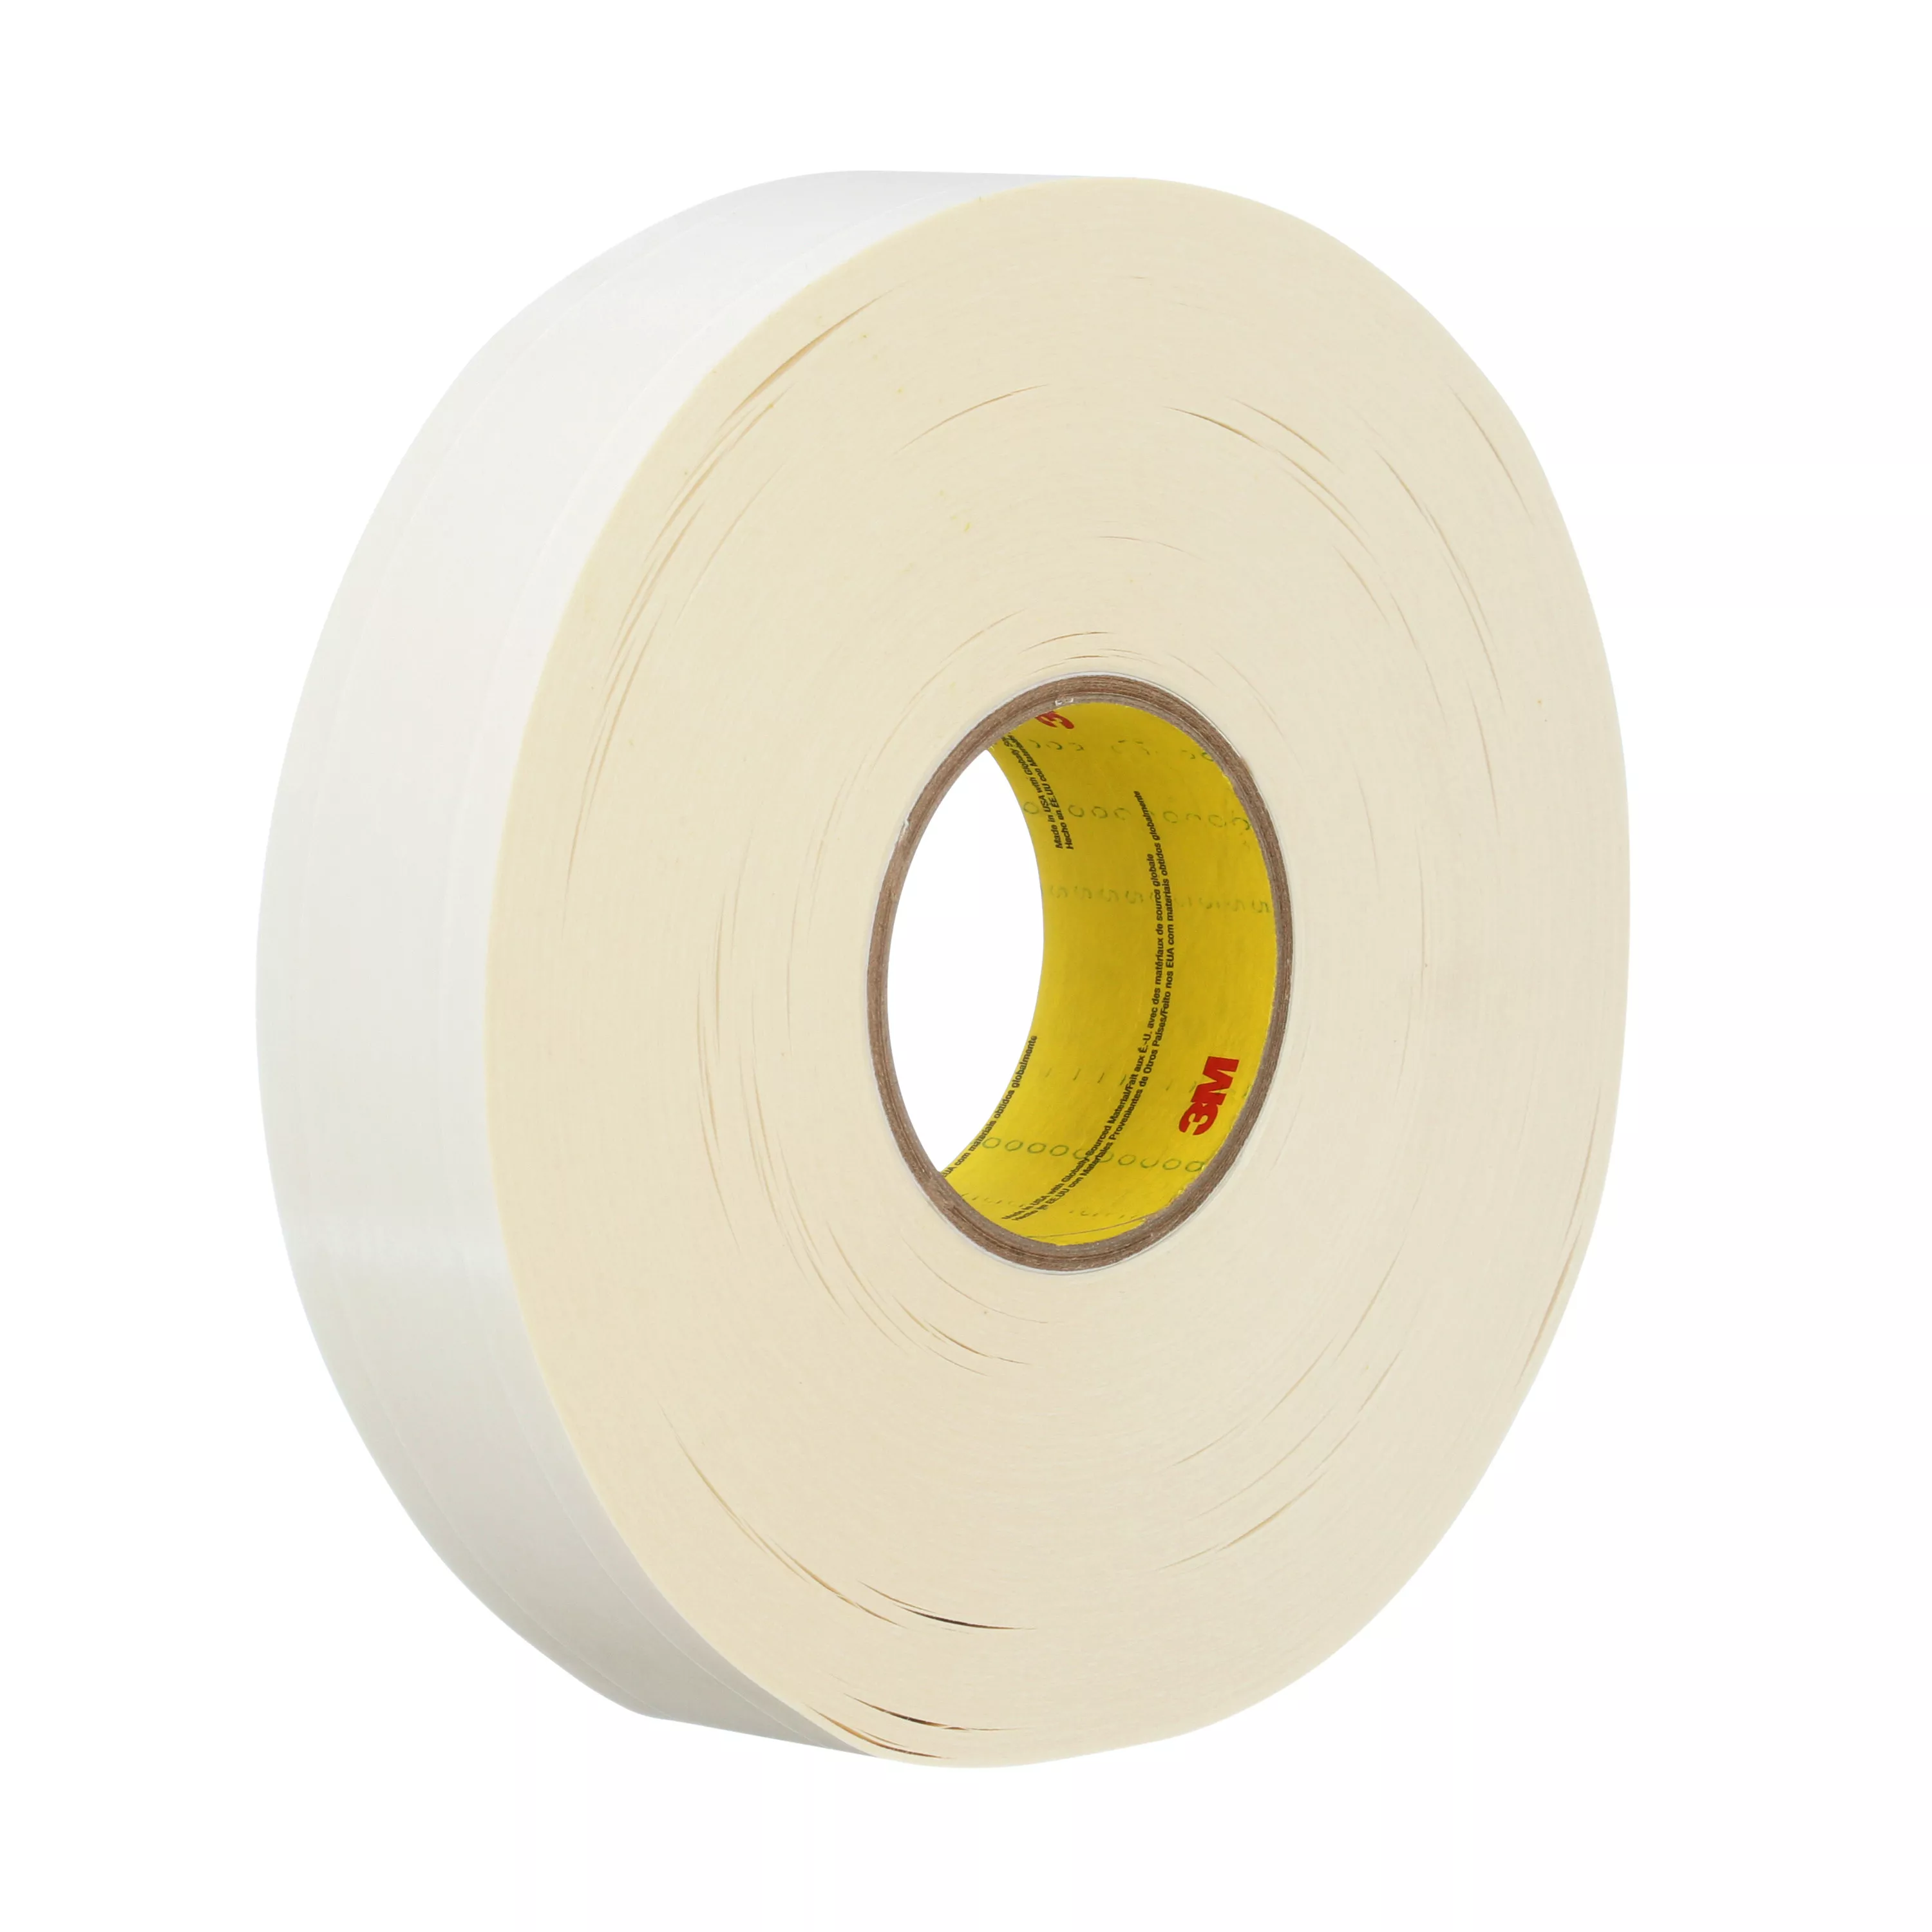 SKU 7100028168 | 3M™ Repulpable Heavy Duty Double Coated Tape R3287